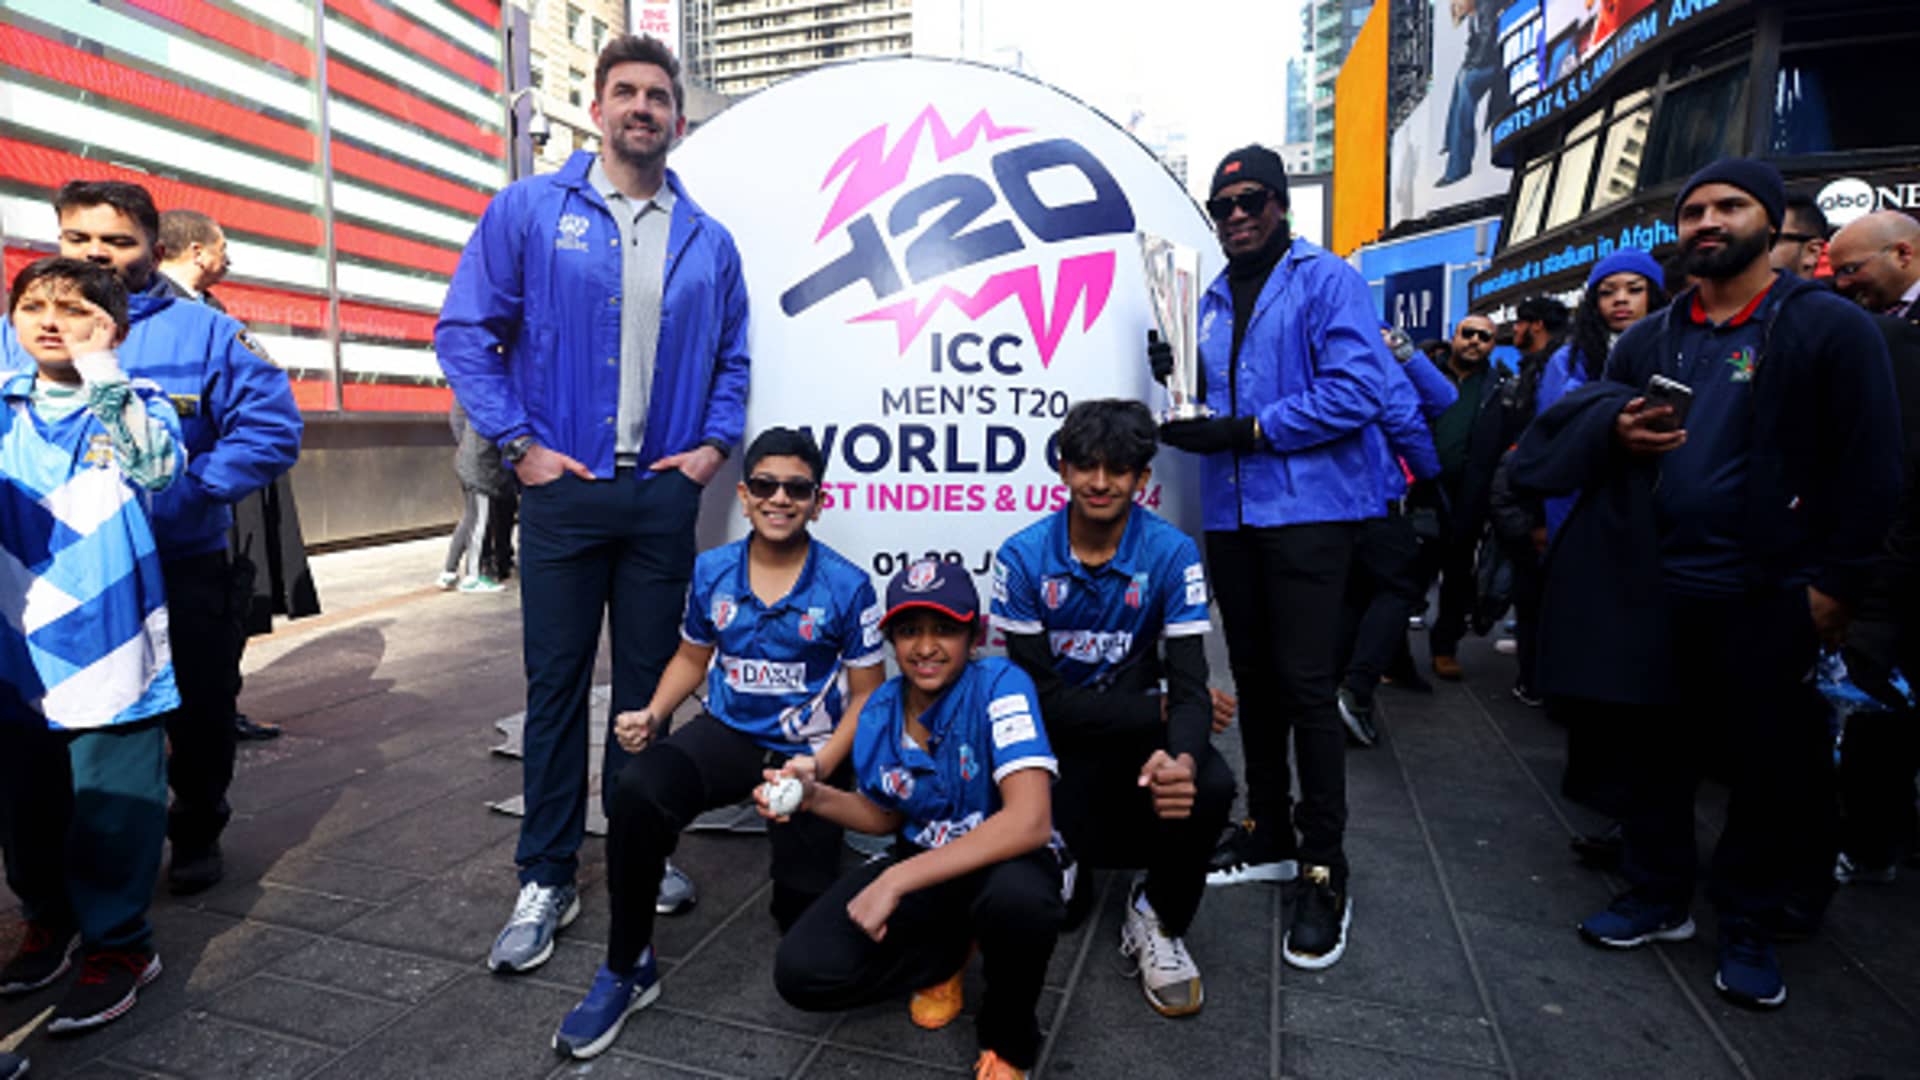 Cricketers Liam Plunkett, center left, and Dwayne Bravo, center right, pose for pictures with children during a media day to mark 100 days to go until the ICC Men's T20 World Cup 2024 co-hosted in the West Indies and the U.S., at Times Square in New York City, Feb. 22, 2024.